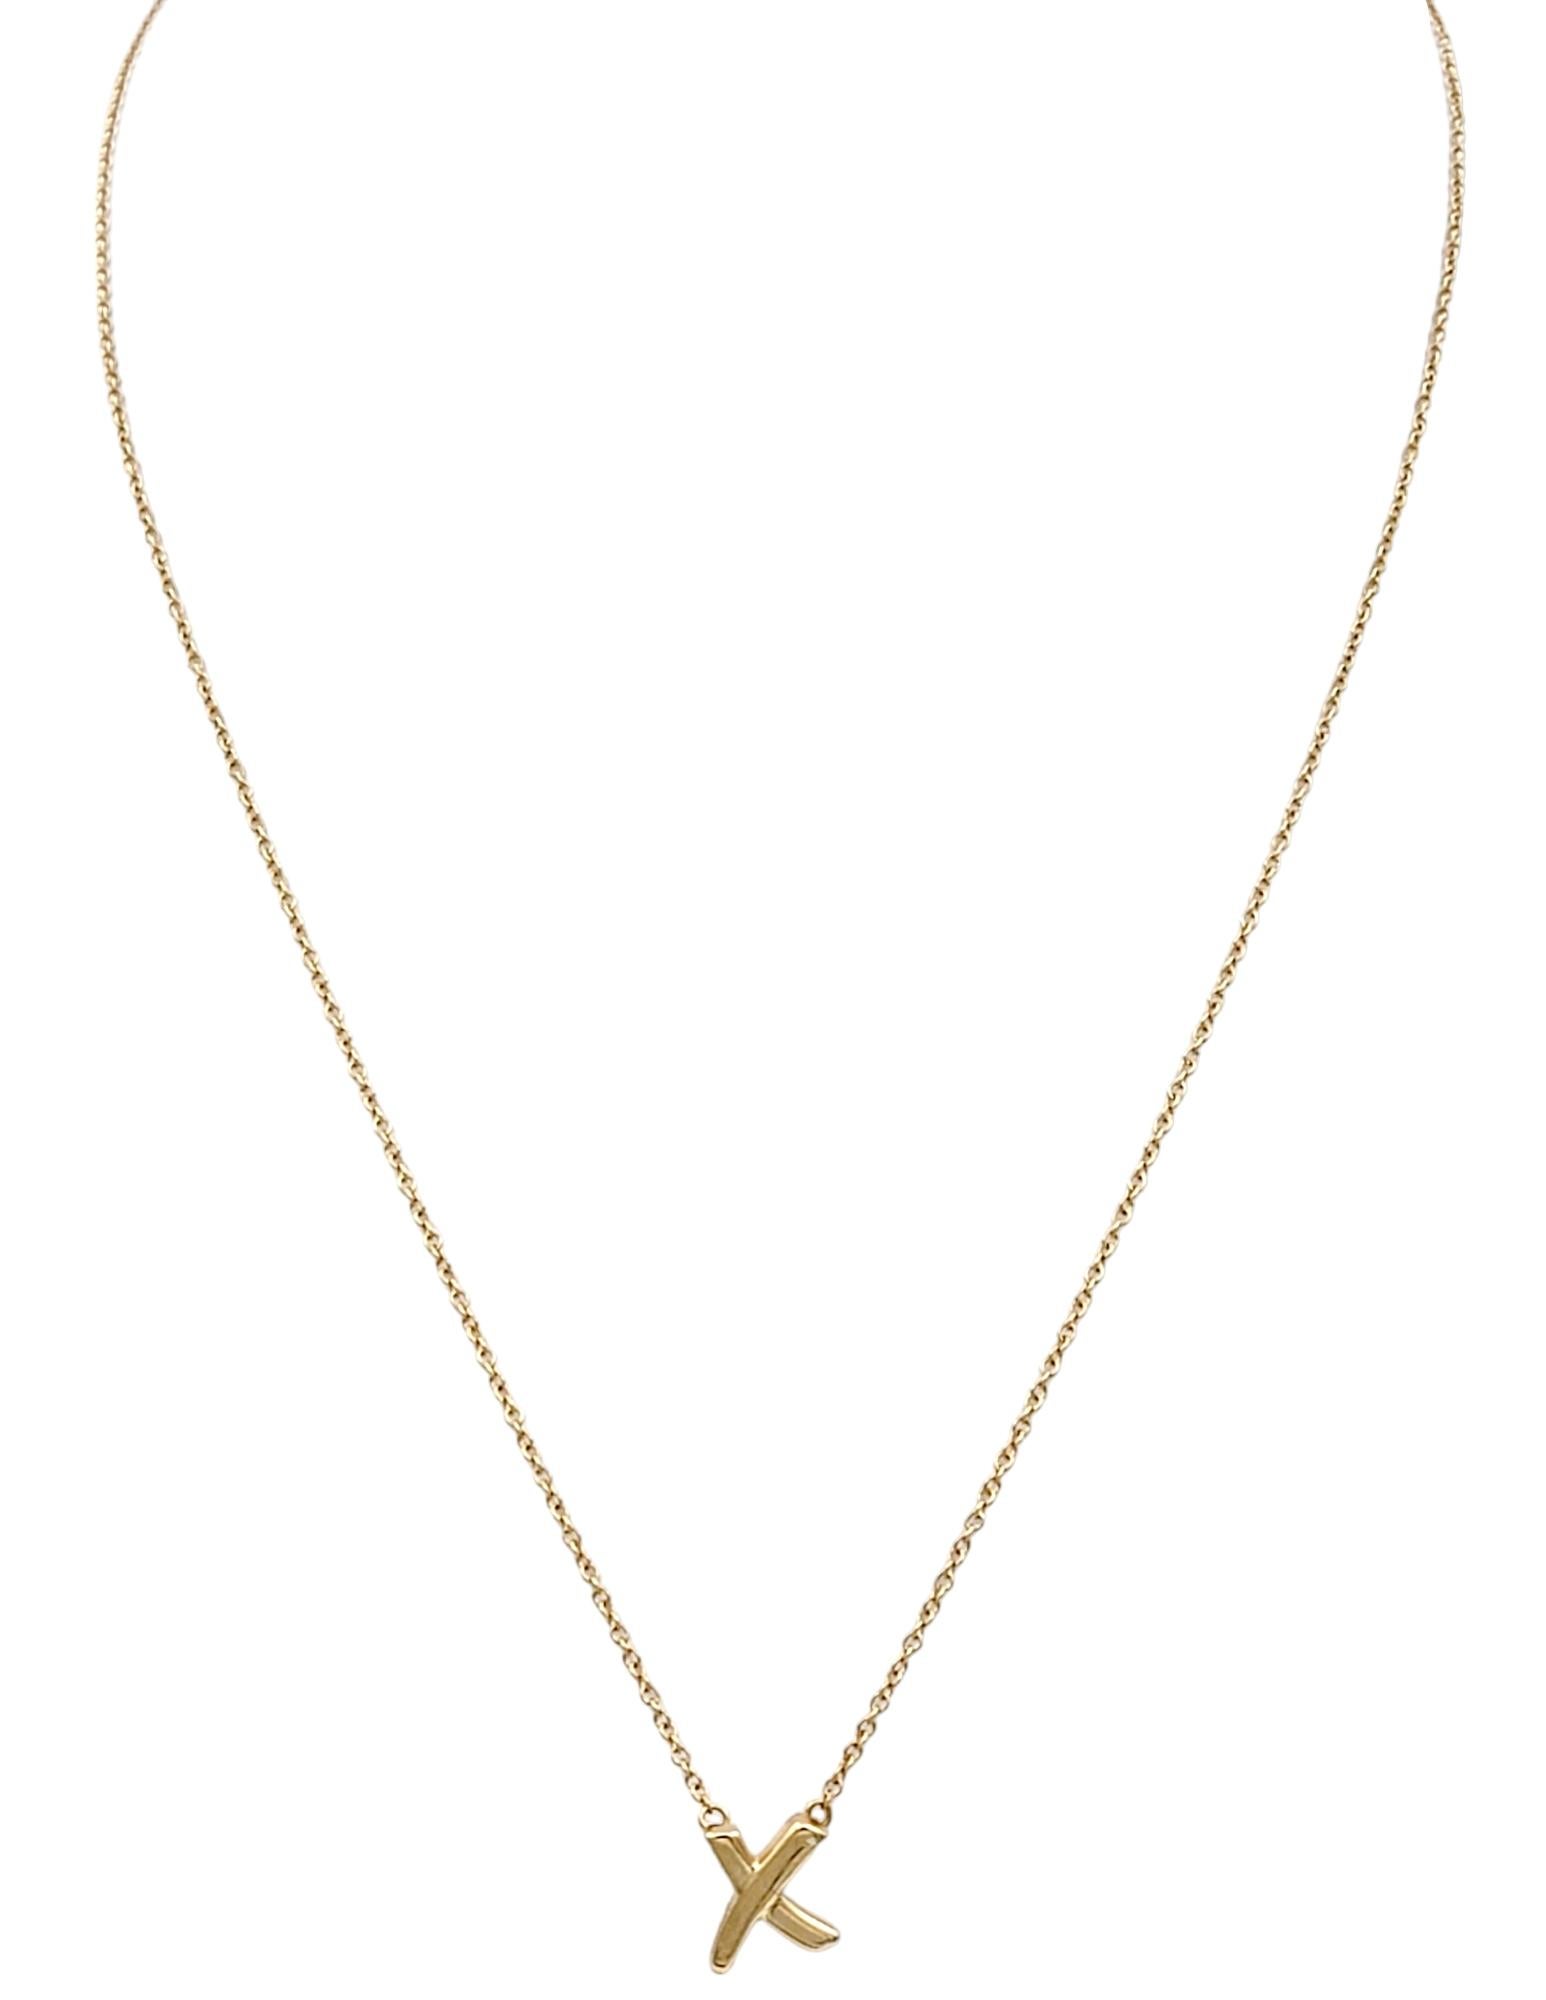 Tiffany & Co. Paloma Picasso Graffiti X Pendant Necklace in 18 Karat Rose Gold In Good Condition In Scottsdale, AZ